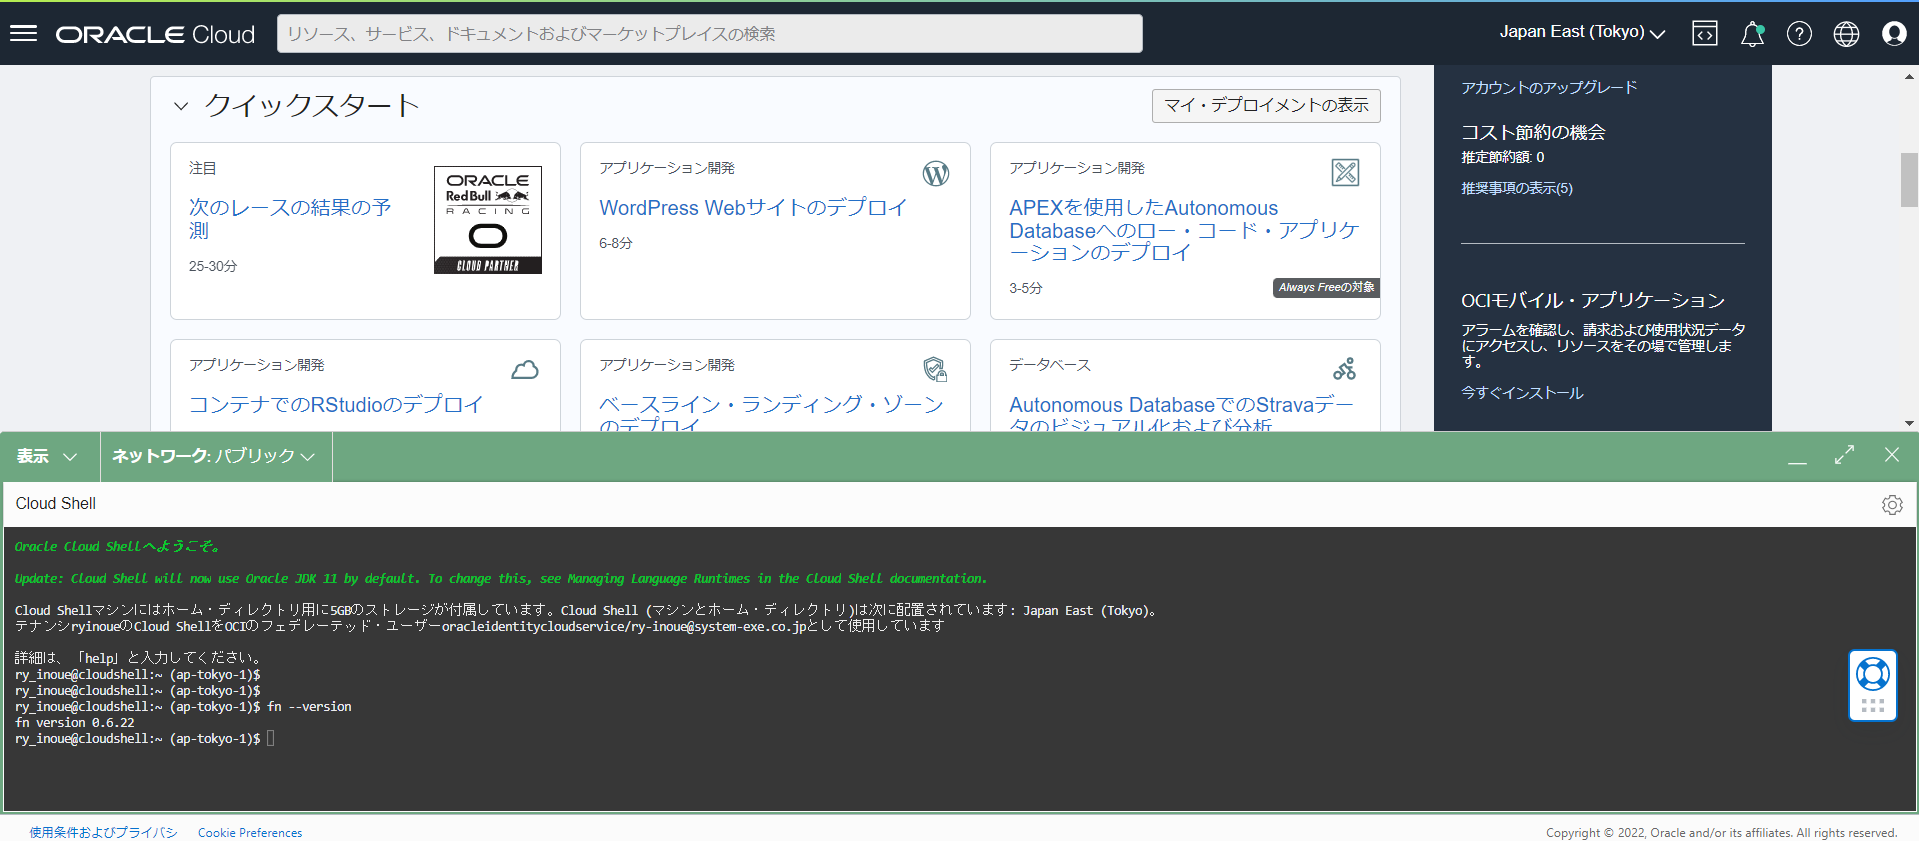 Oracle Cloud Infrastructure Functionsではじめるサーバレス入門 5